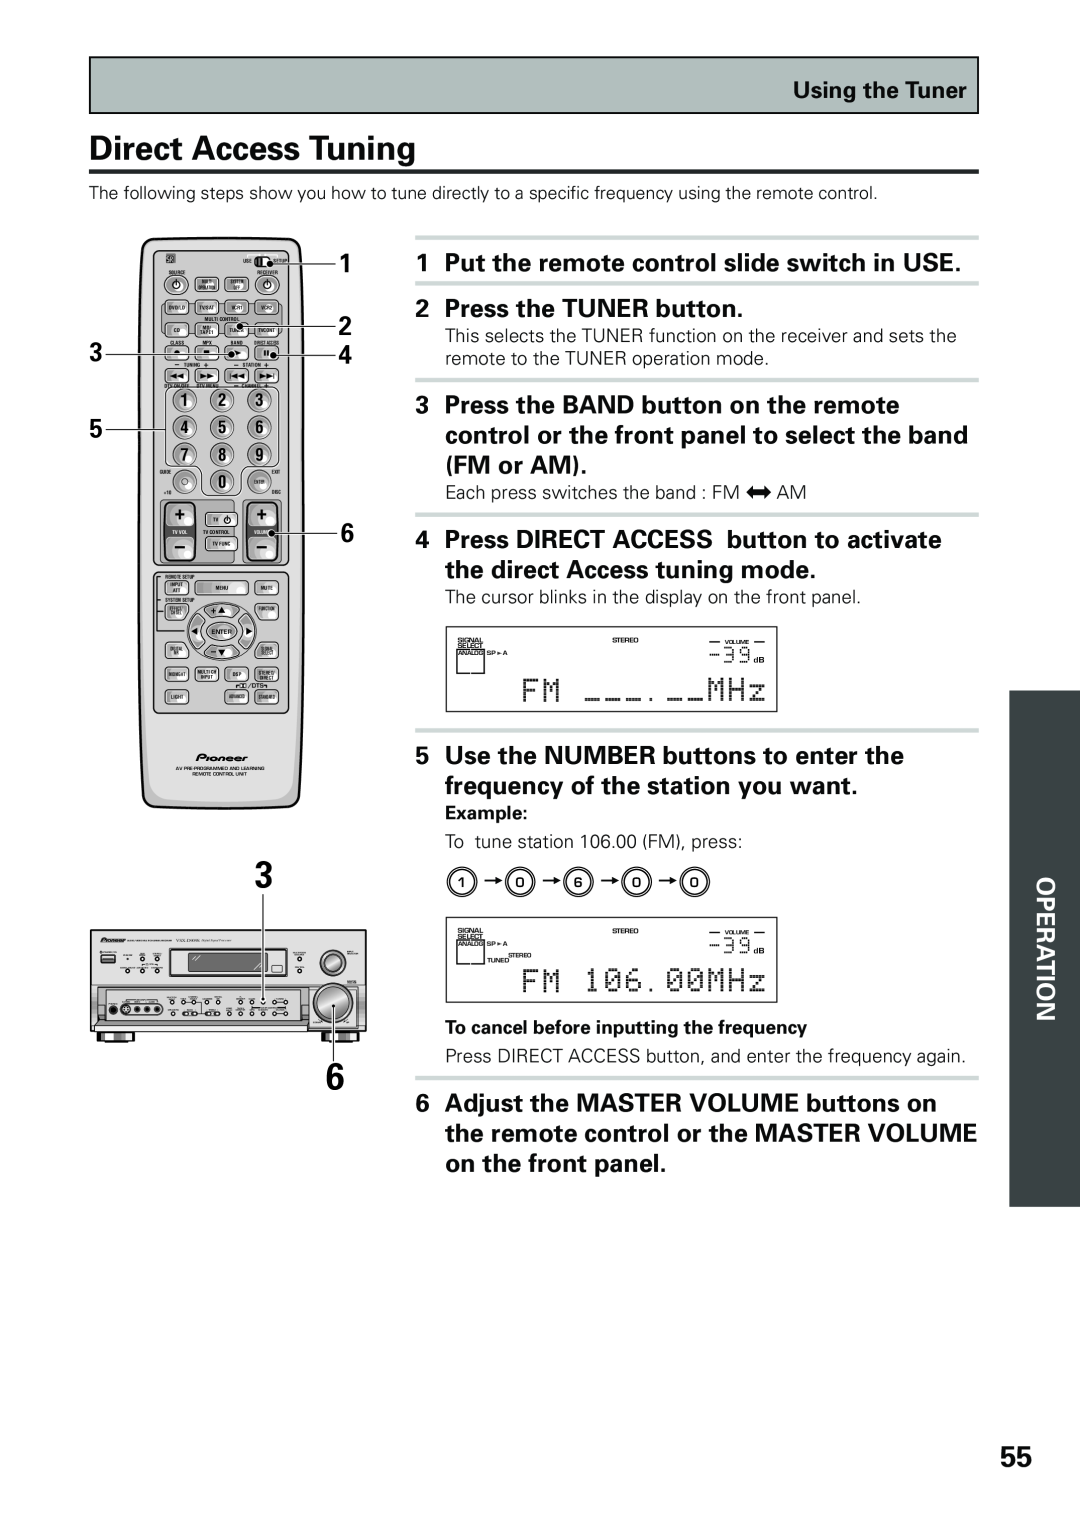 Pioneer VSX-D909S manual Direct Access Tuning, 1 2 4 6, FM or AM, 1Put the remote control slide switch in USE, Operation 